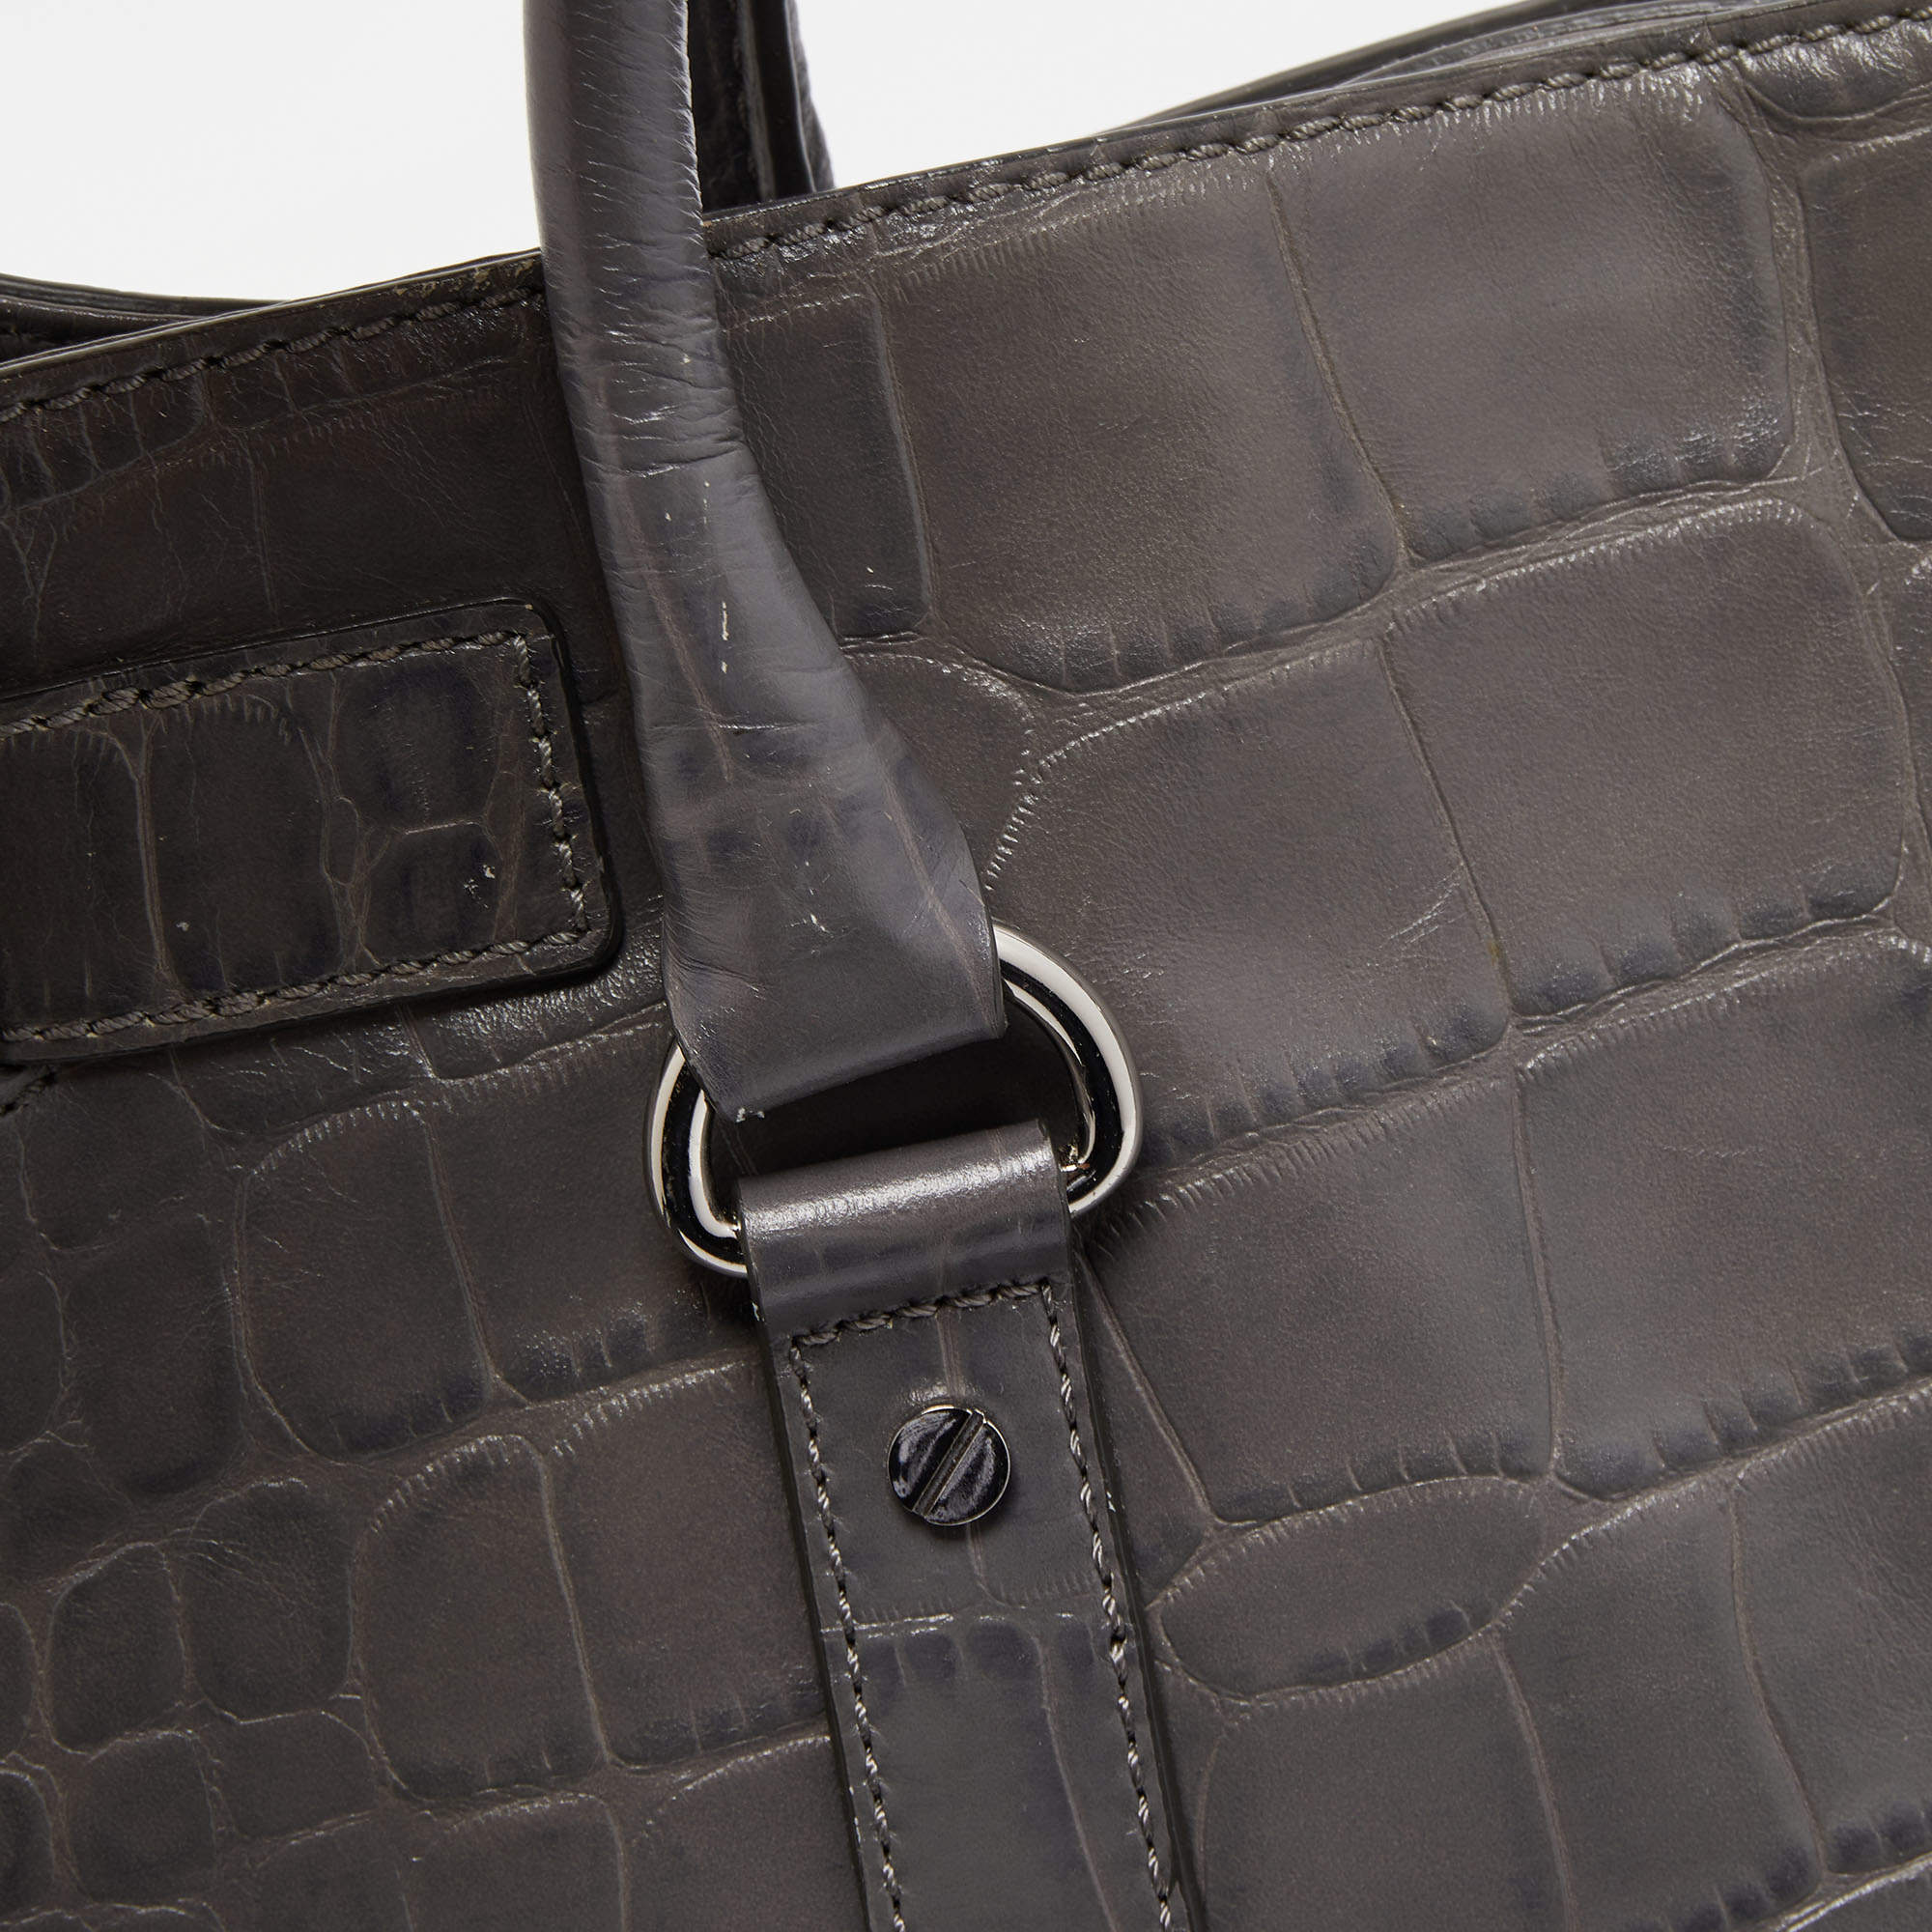 Michael Michael Kors Grey Croc Embossed Leather Large Hamilton North South Tote